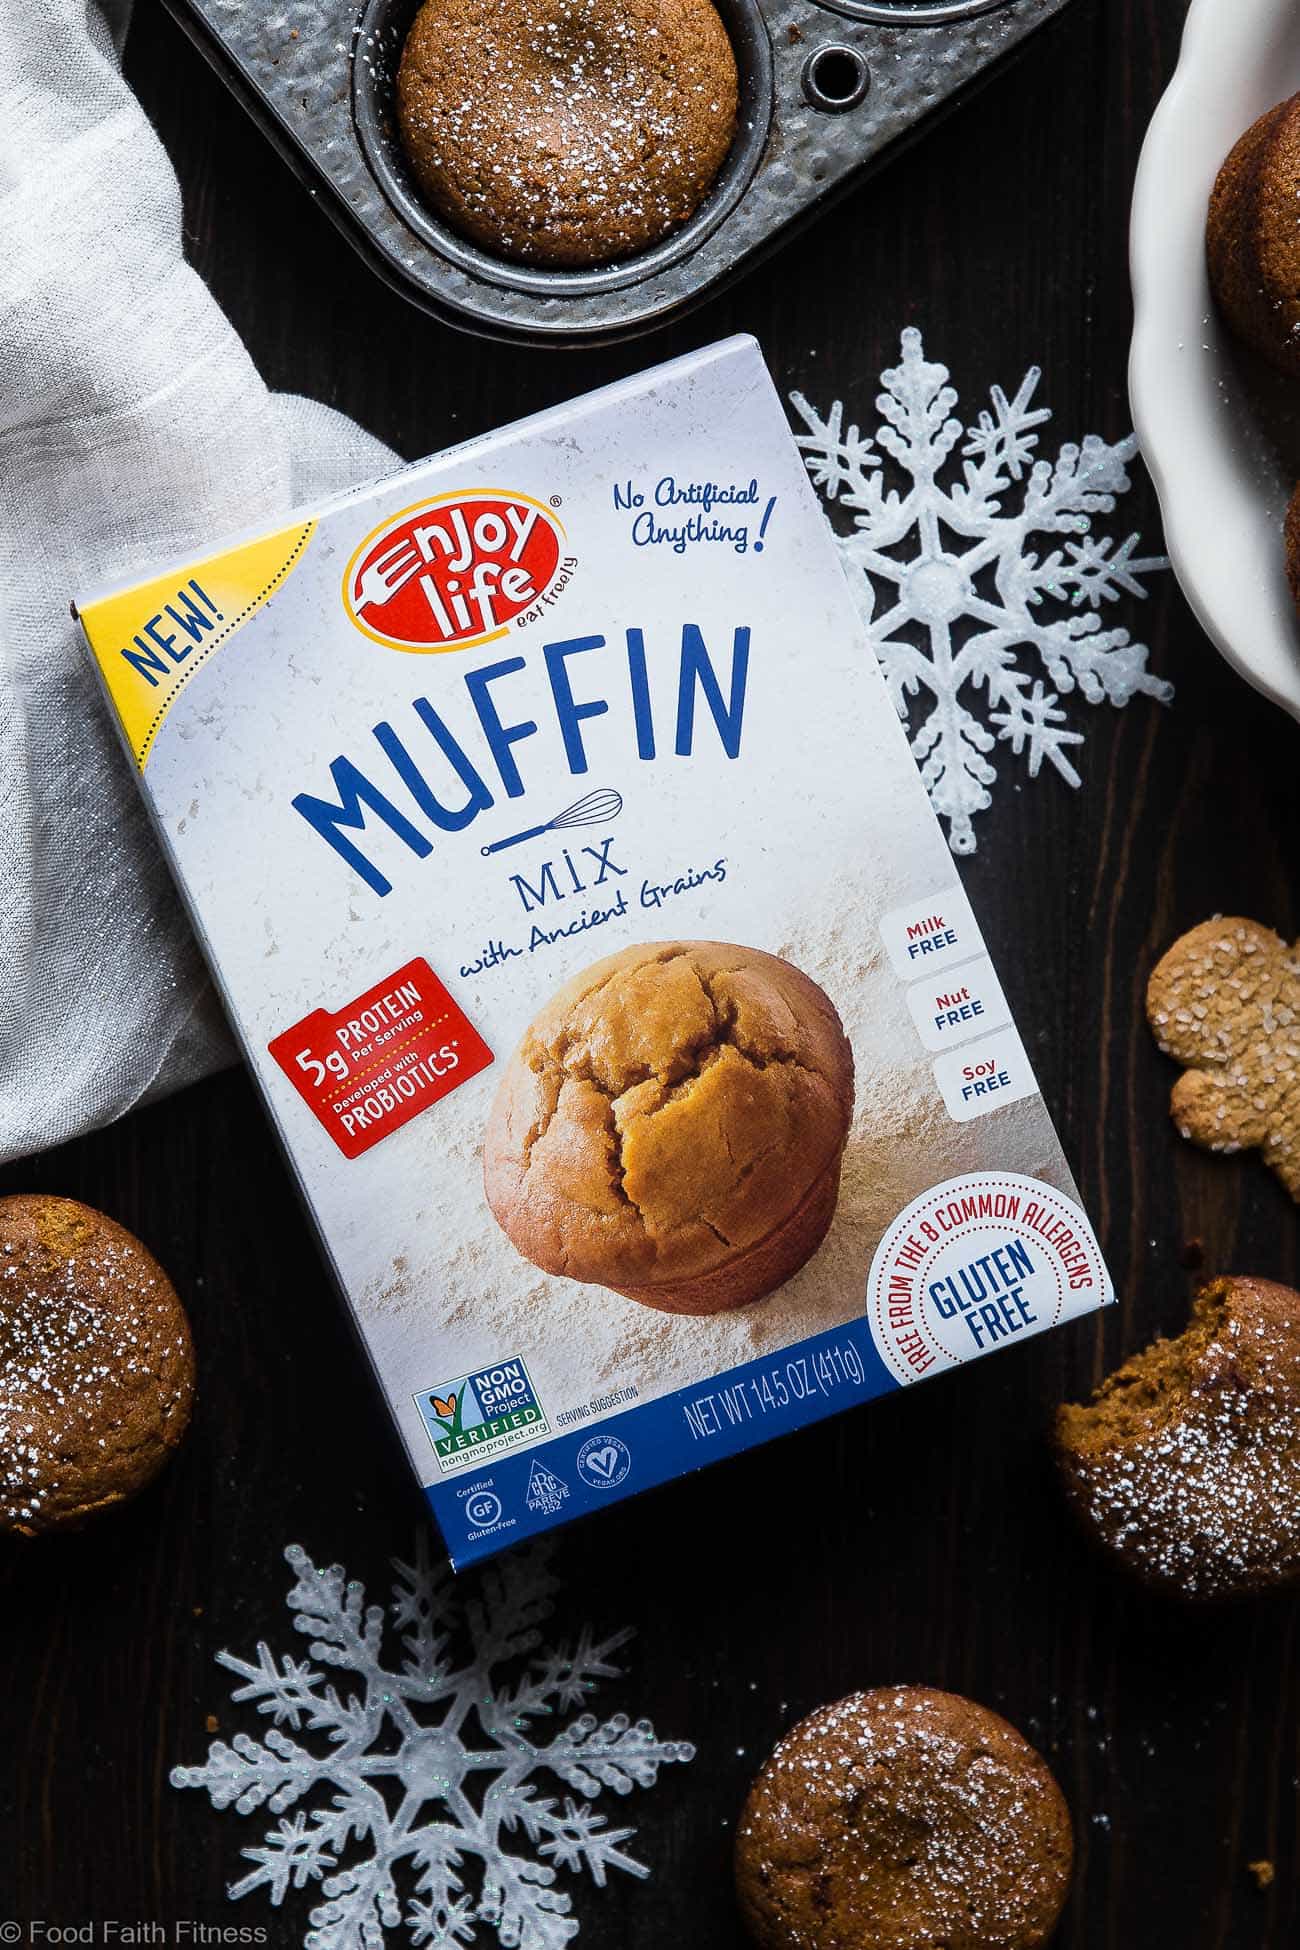  The BEST Healthy Gingerbread Muffins  - This truly is the best healthy gingerbread muffin recipe! Dairy and egg free, vegan friendly and only 5 ingredients and perfect for Christmas morning! | Foodfaithfitness.com | @FoodFaithFit